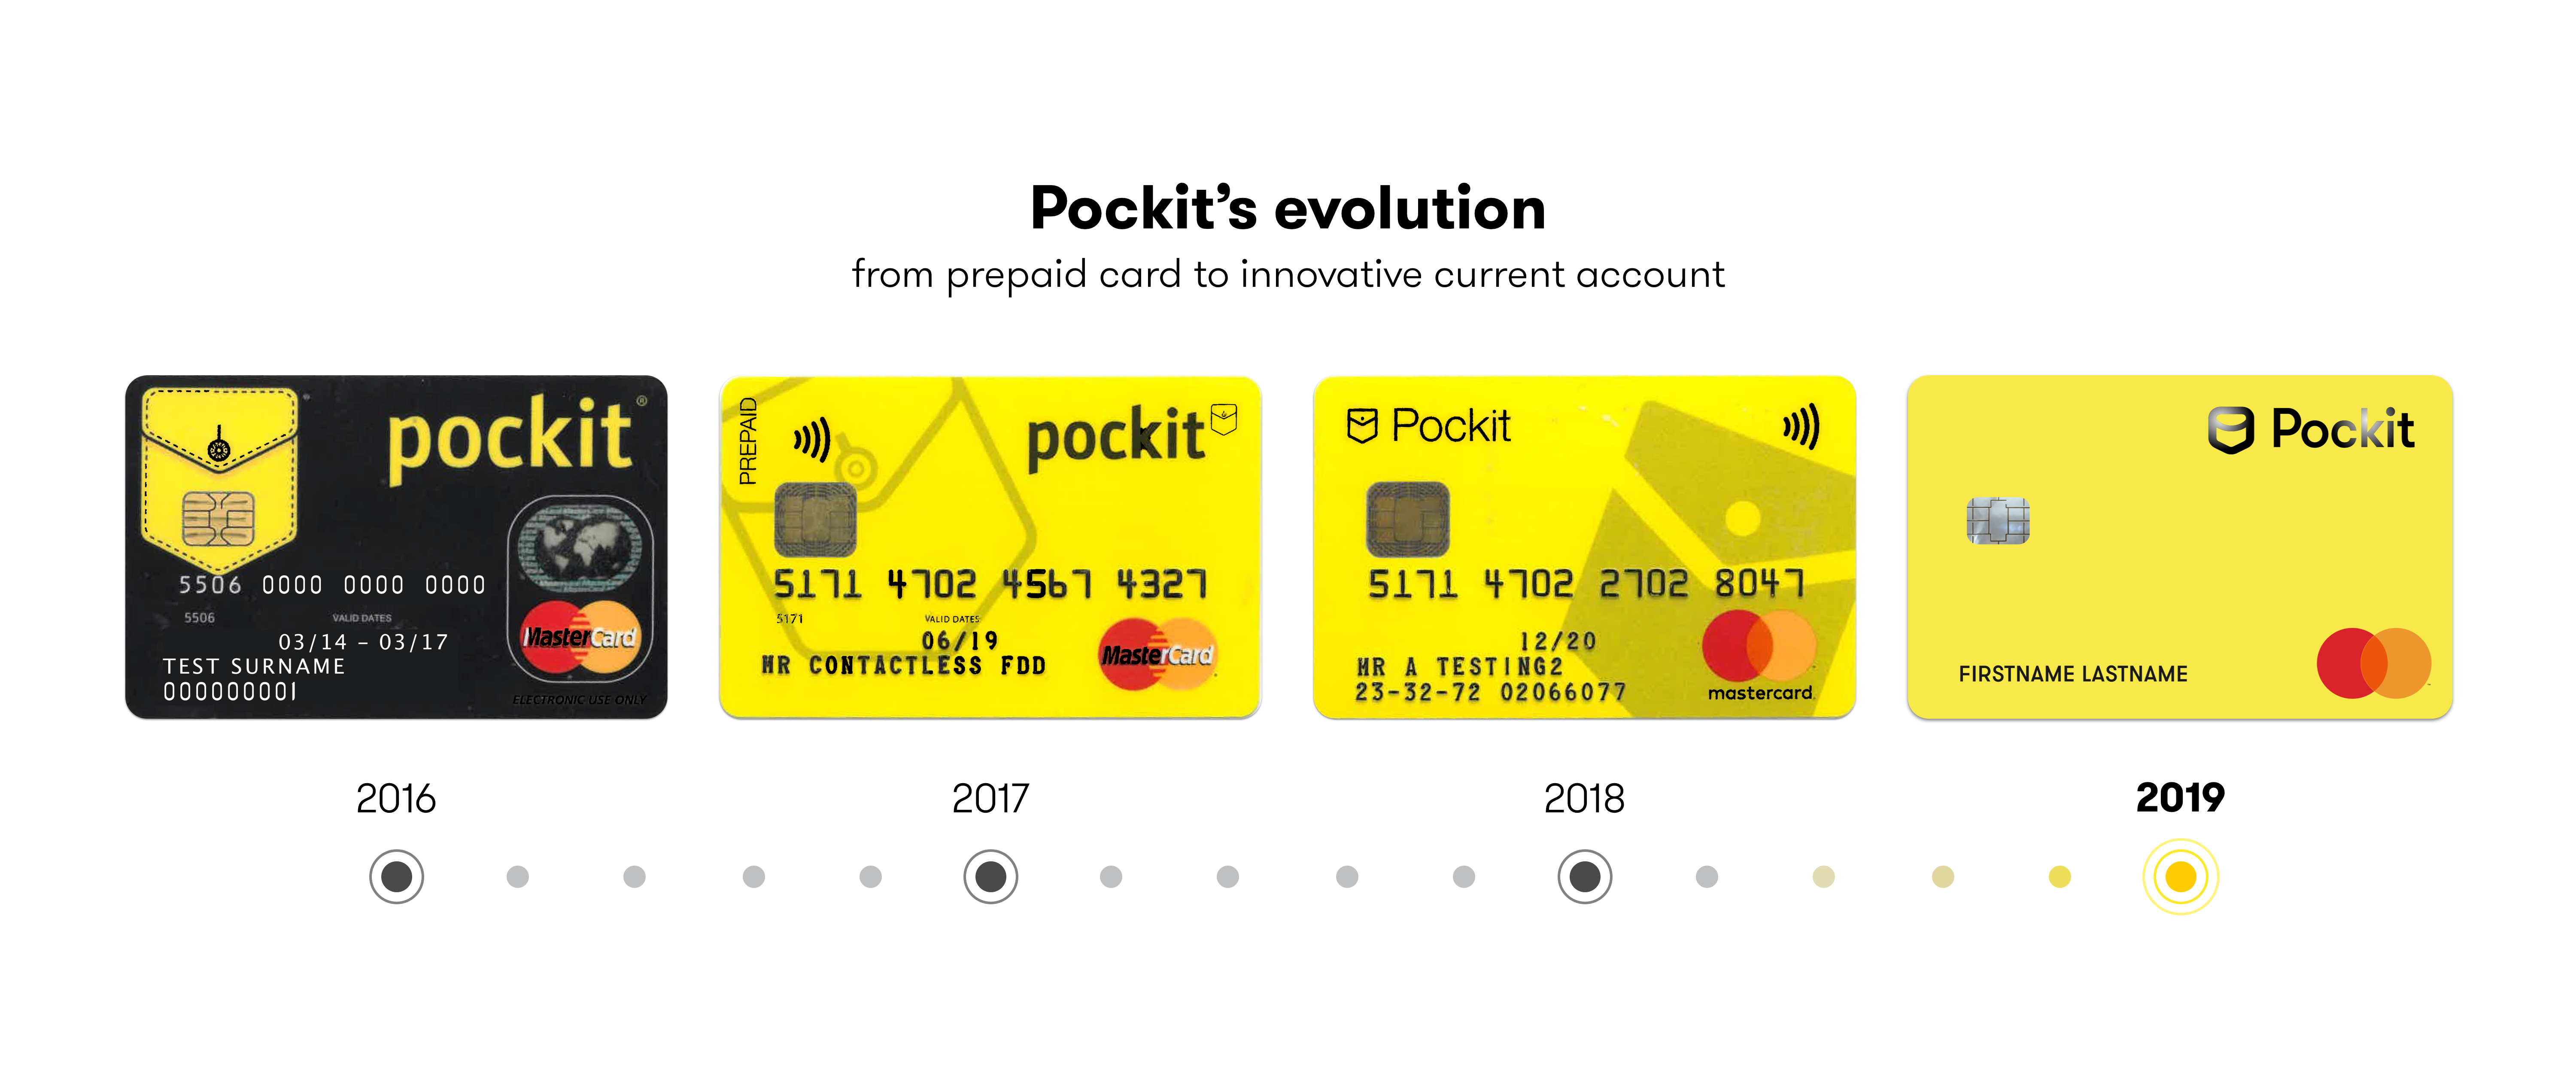 what is pockit